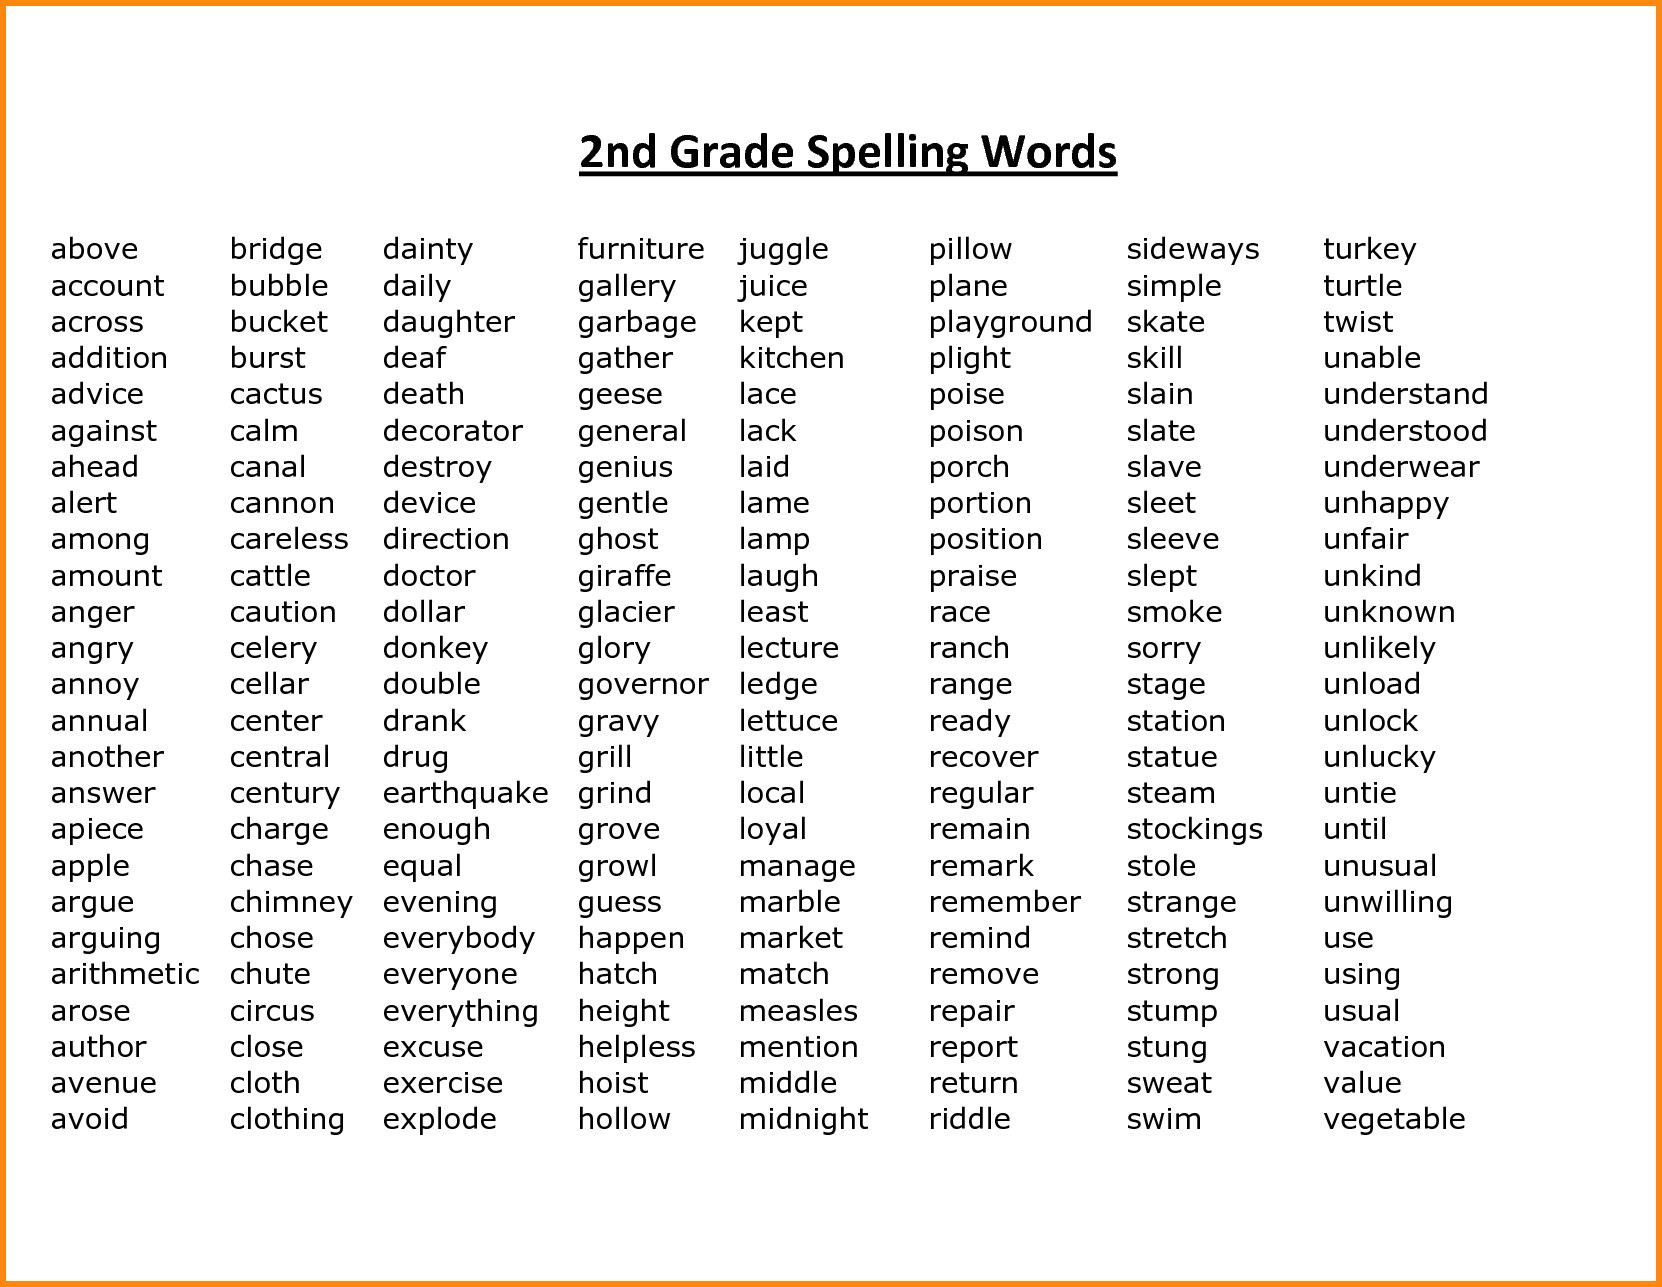 2nd-grade-spelling-words-best-coloring-pages-for-kids